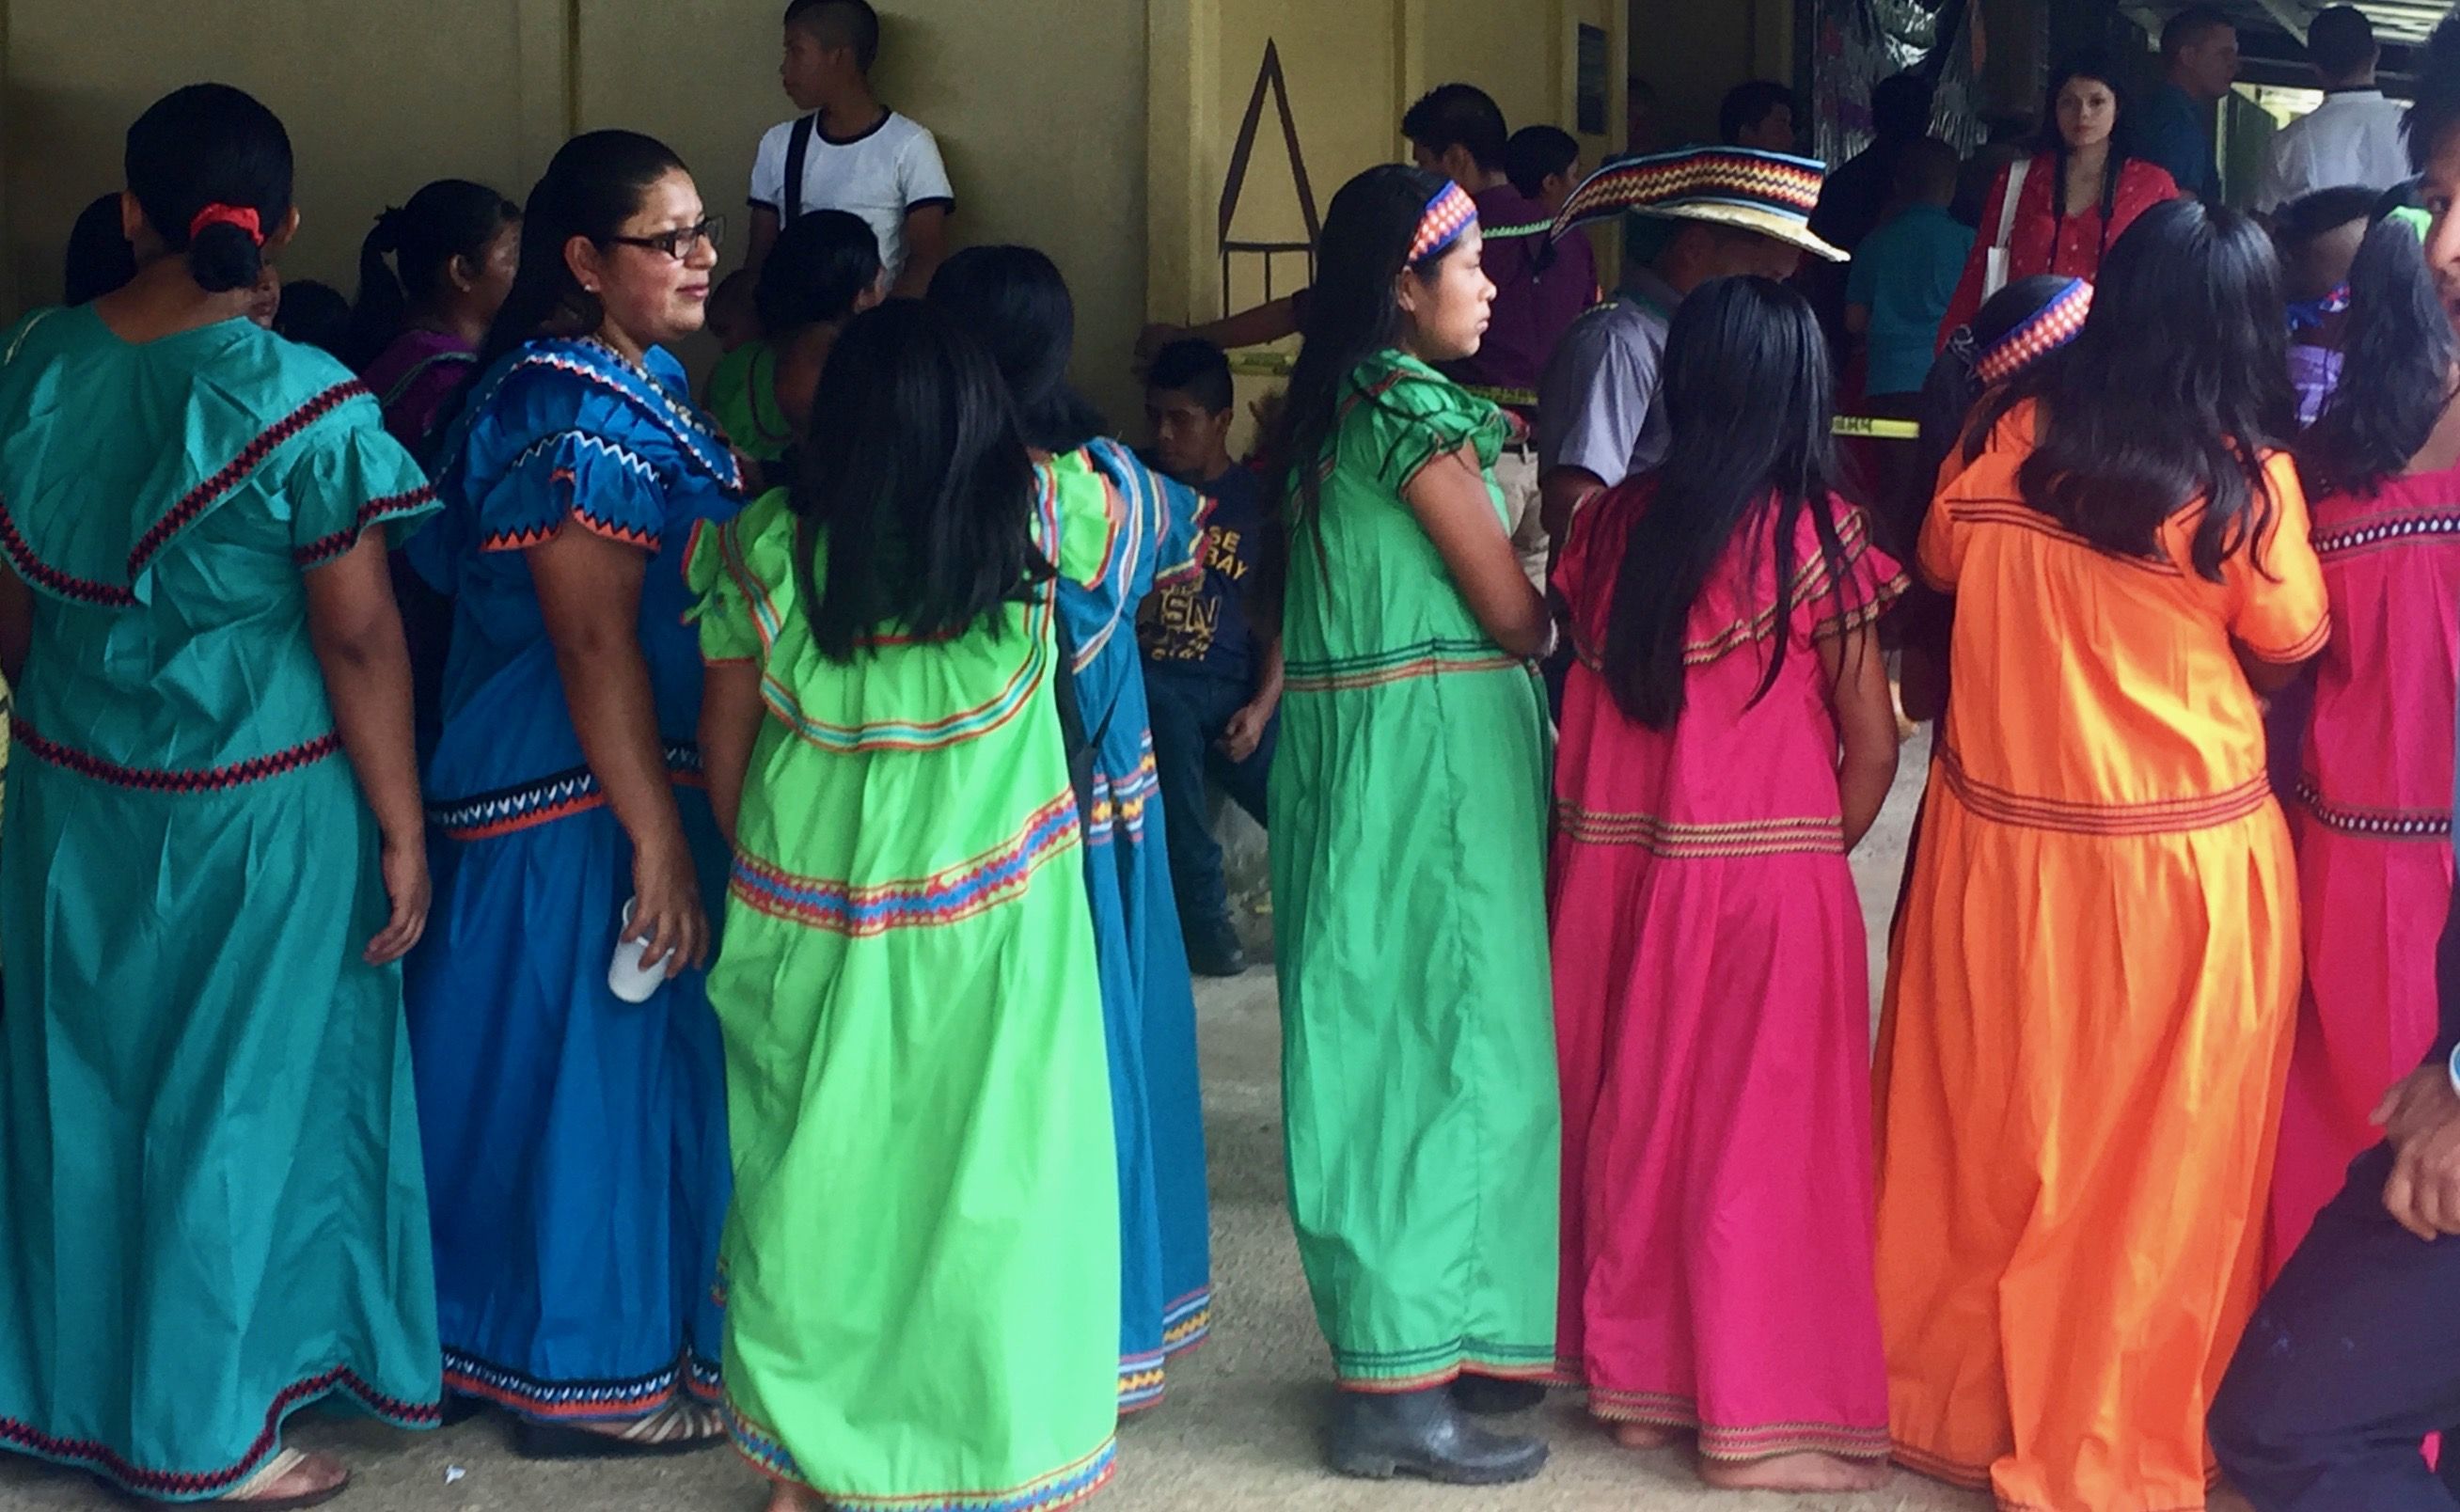 In southern Costa Rica, long brightly colored dresses are commonly associated with the Ngäbe-Buglé. A group of young Ngäbe-Buglé women dressed in traditional clothing watch a dance performance produced by the elementary school in their community. Image by Samira Tella. Costa Rica, 2018. 